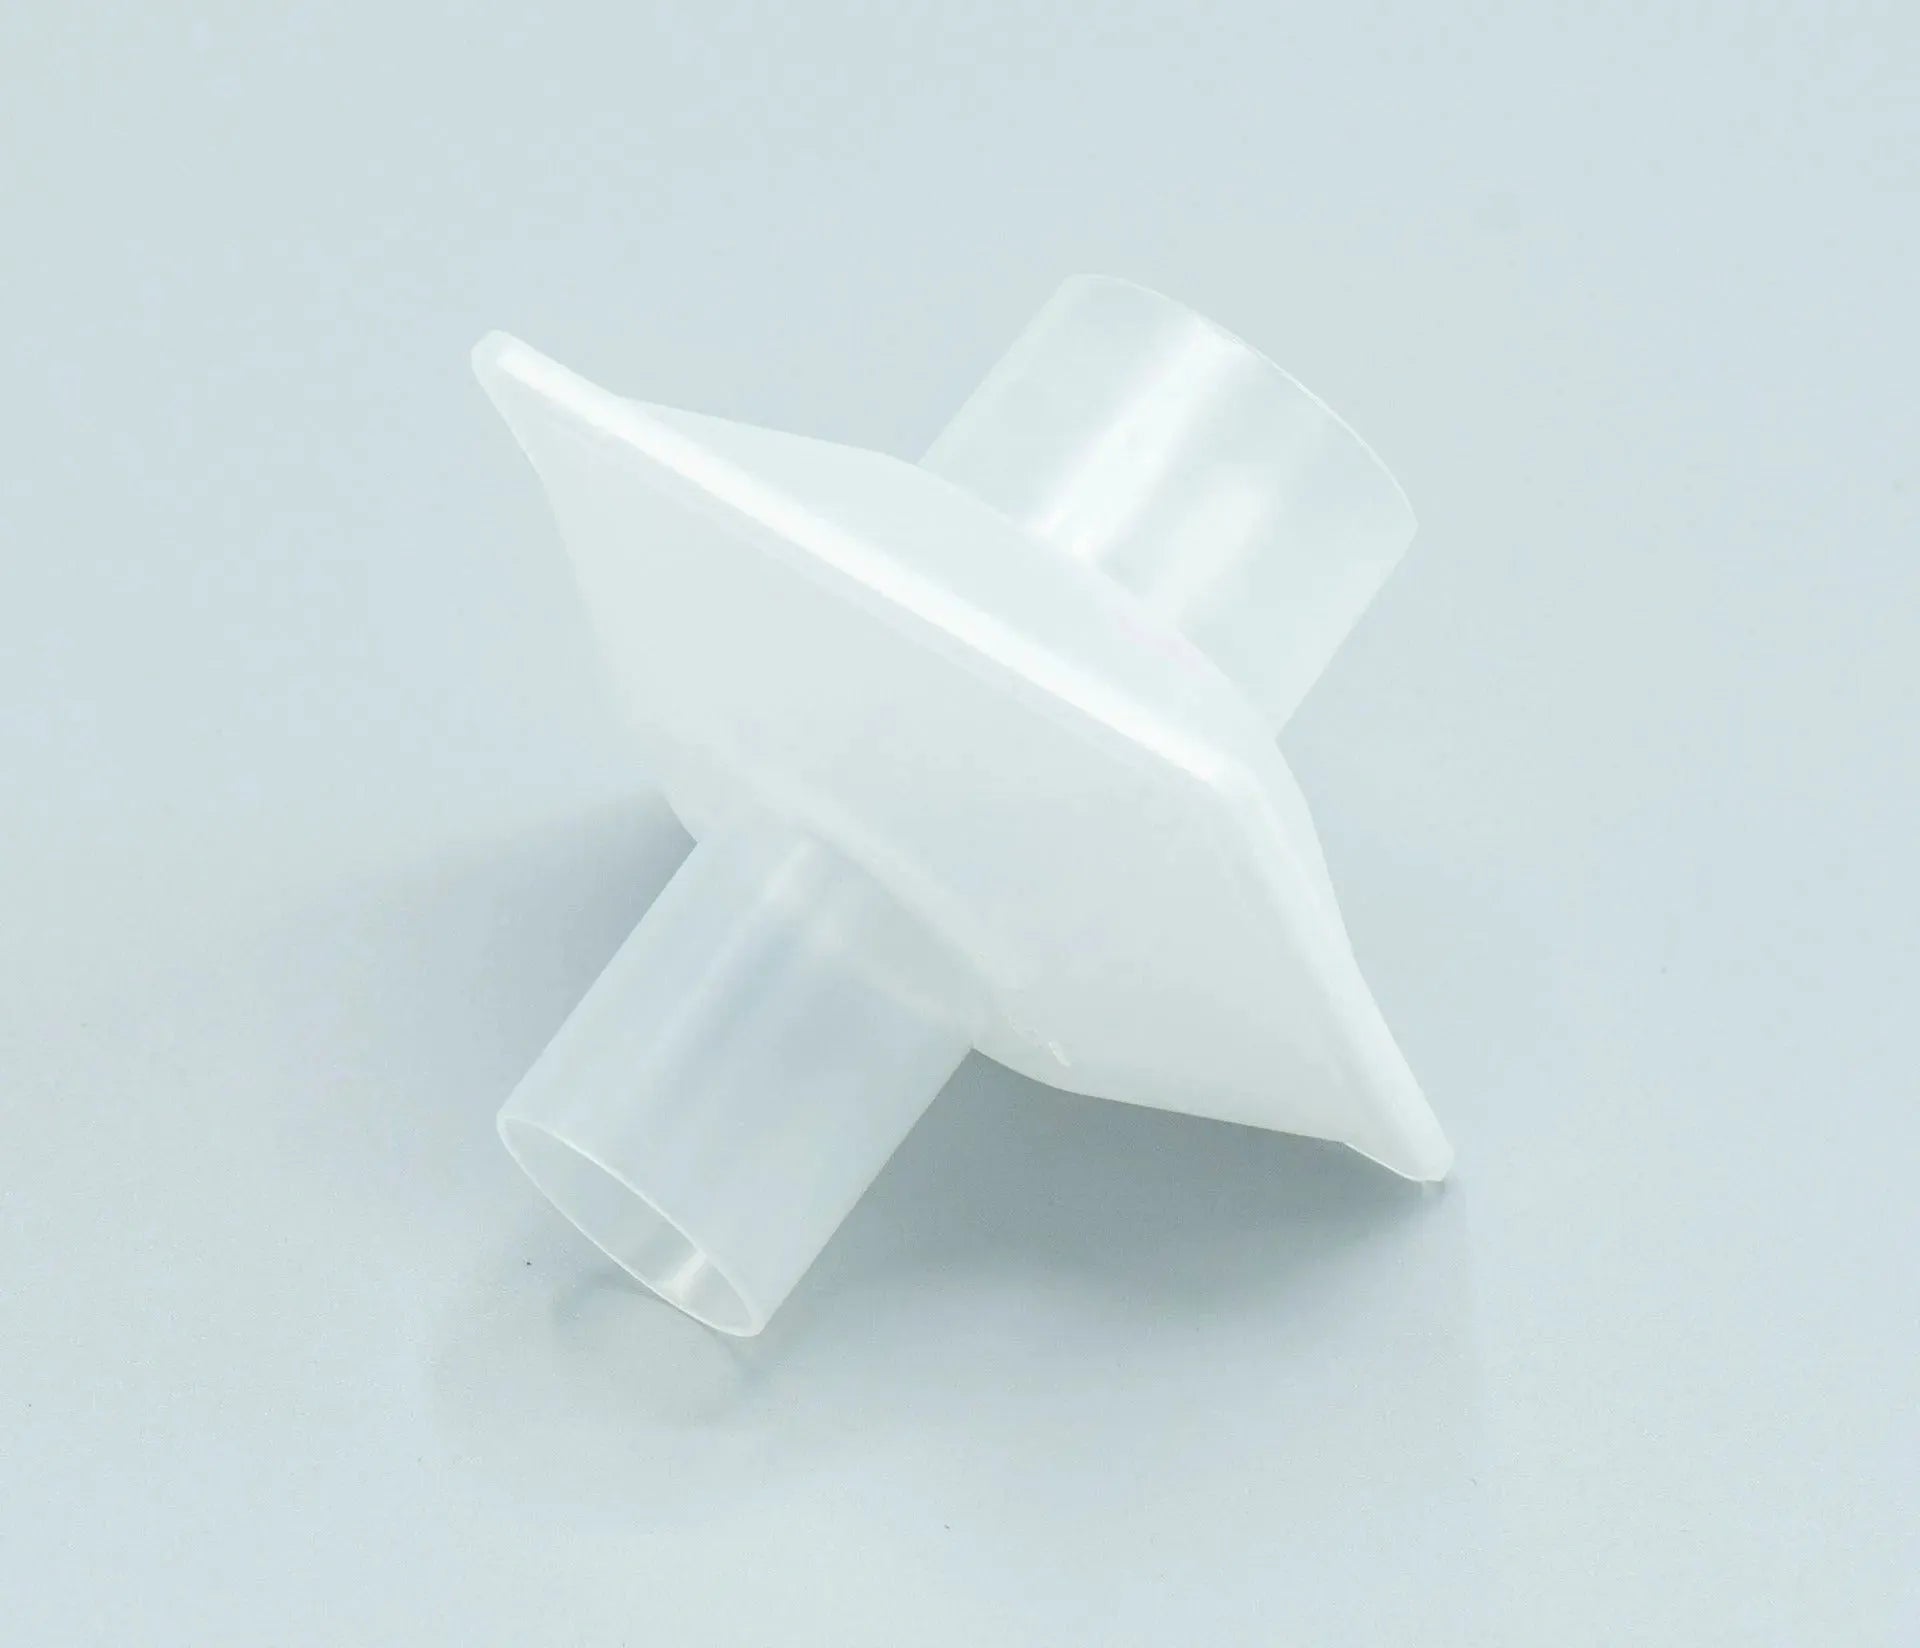 Eco Lab Spiro Bacterial/Viral Filter is white translucent in color.